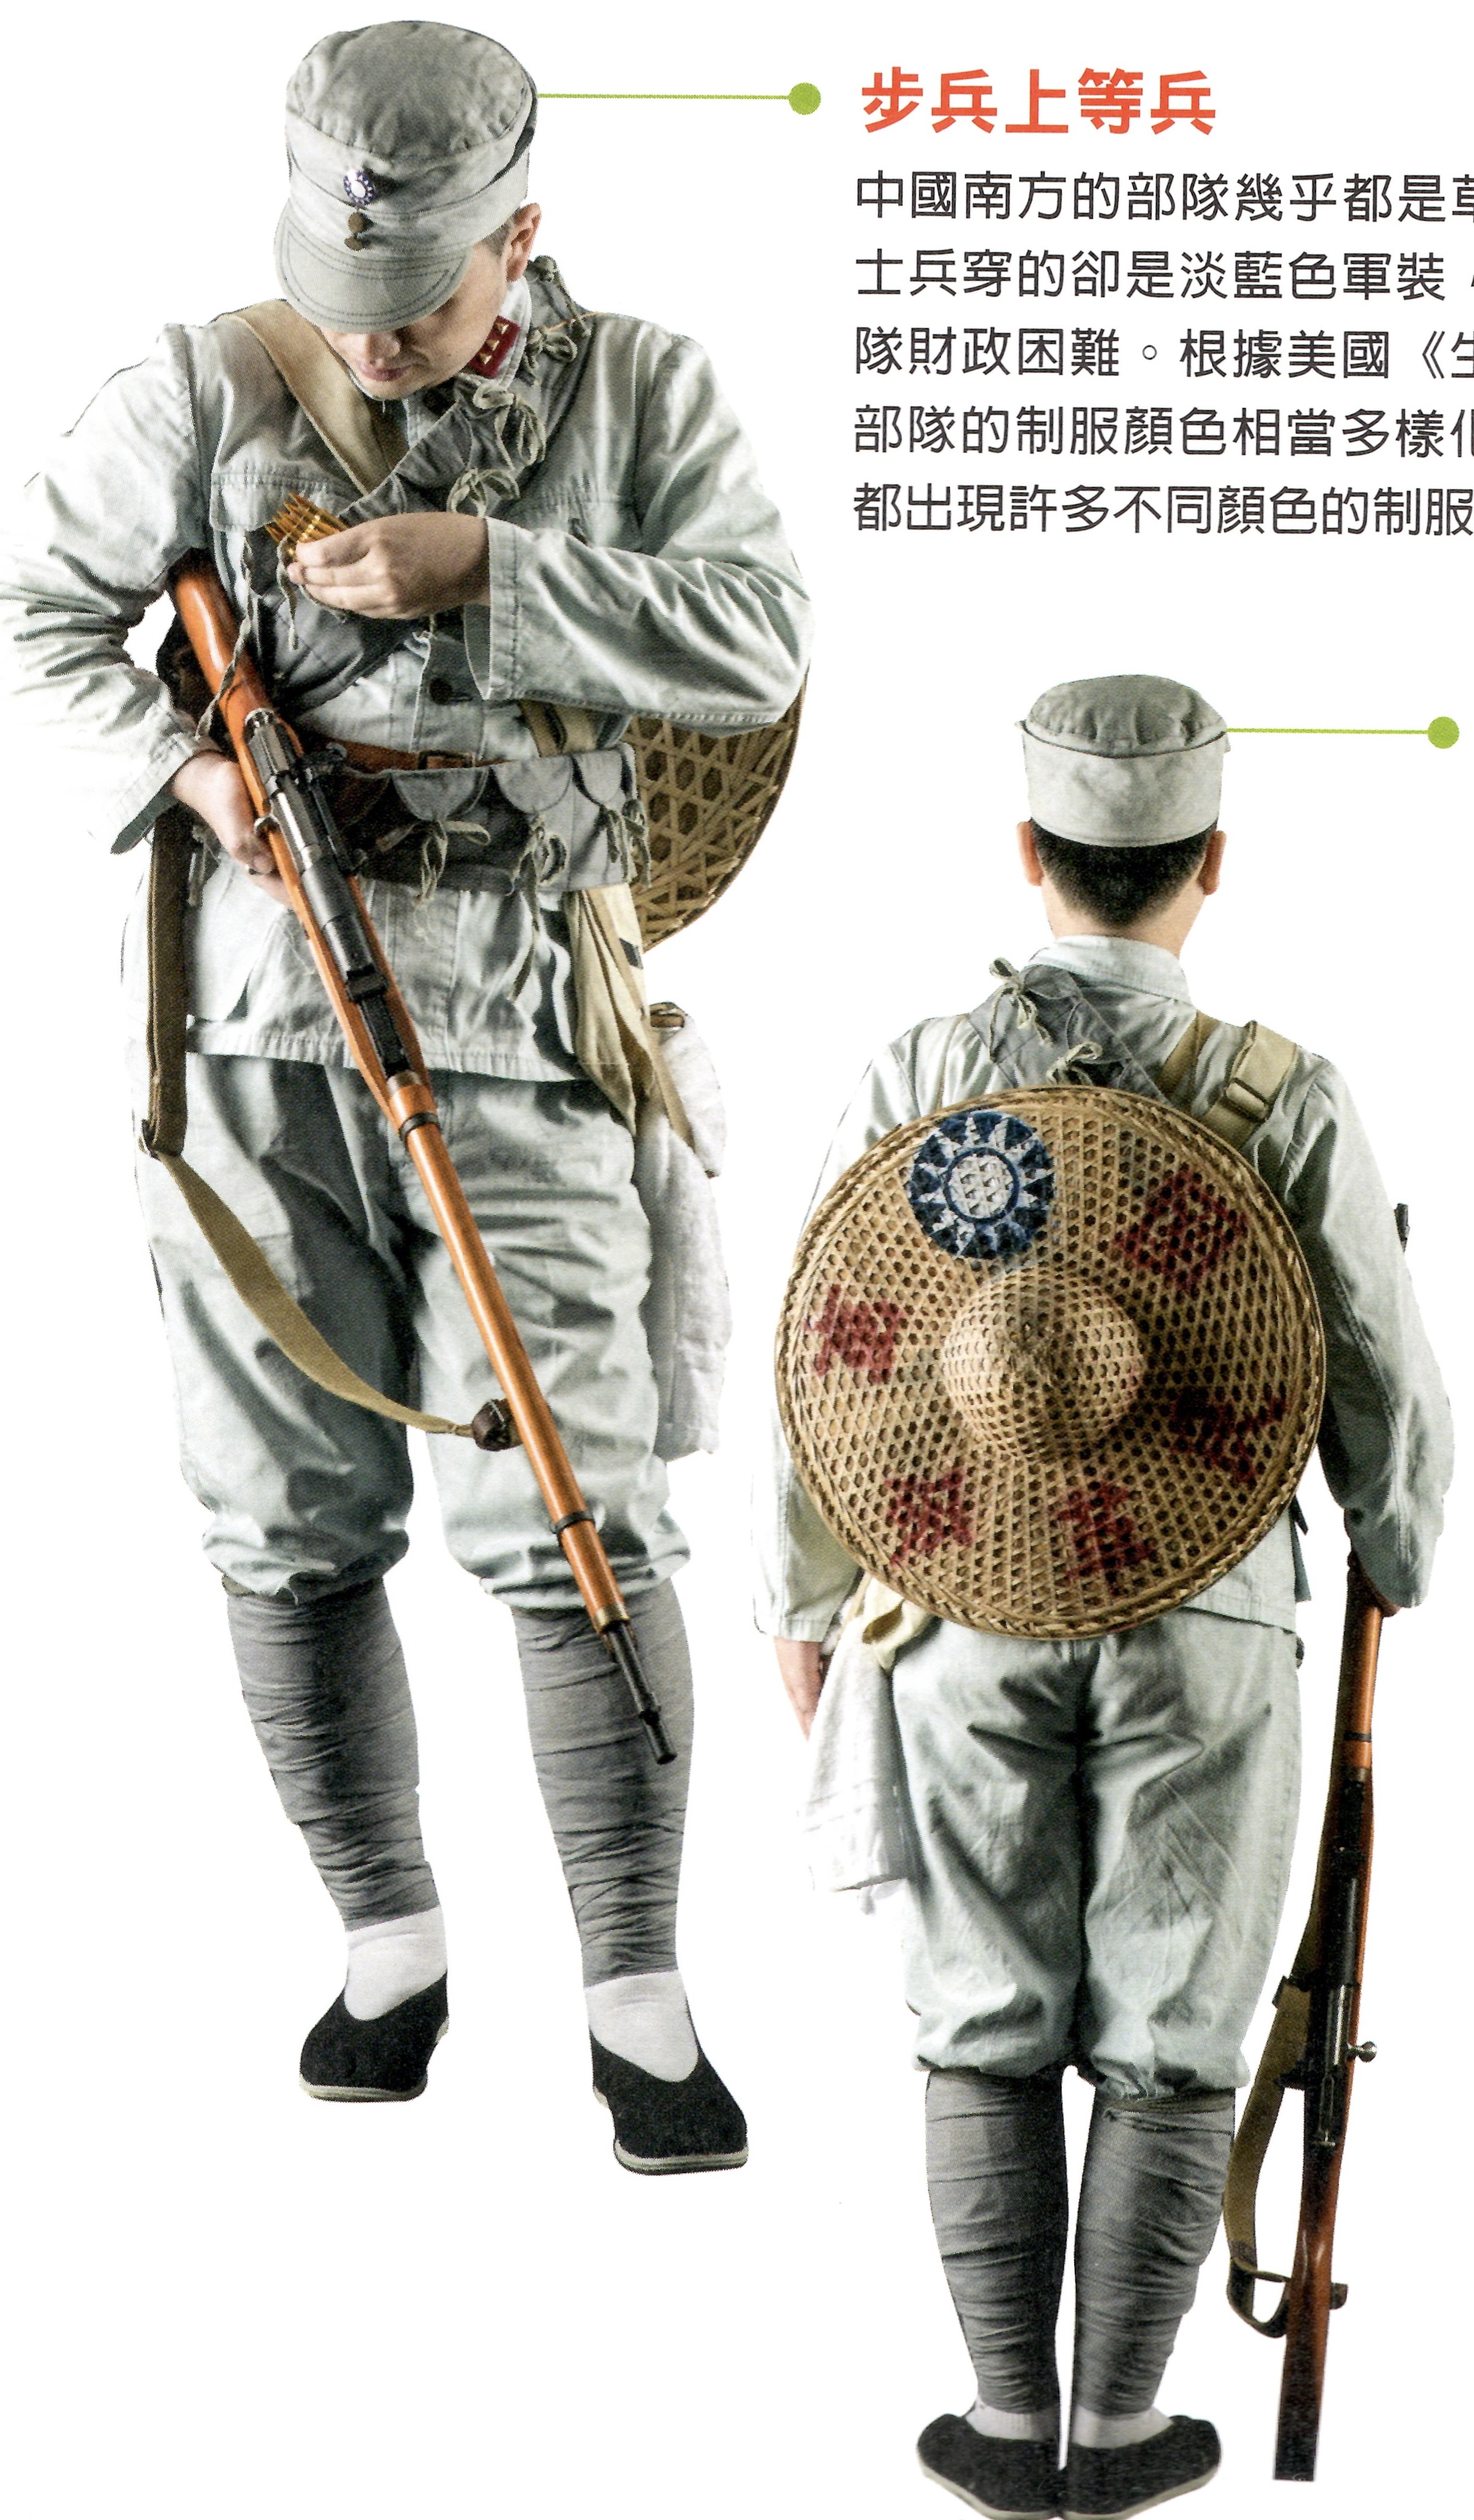 A Century of Chinese Uniforms | China in WW2 | Mobile Version